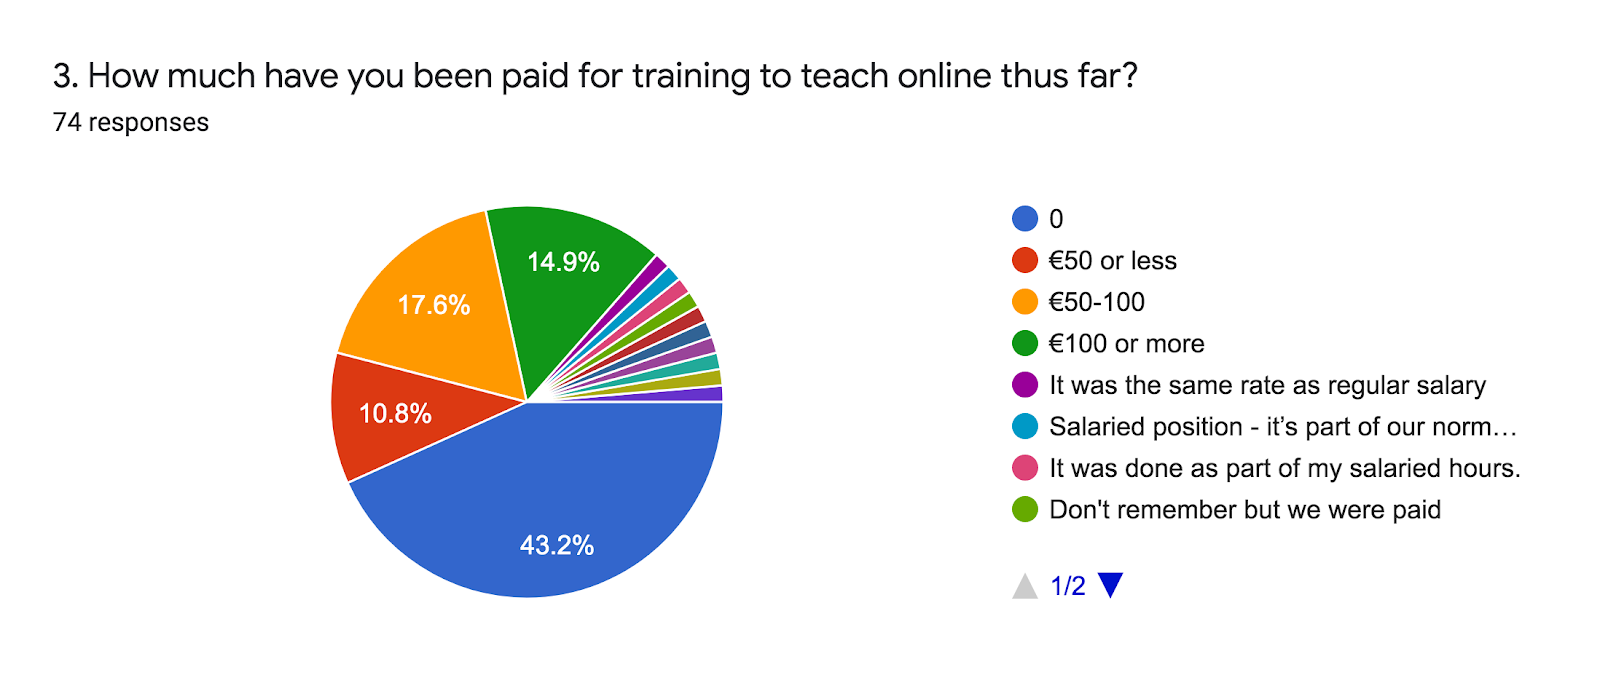 Forms response chart. Question title: 3. How much have you been paid for training to teach online thus far?. Number of responses: 74 responses.